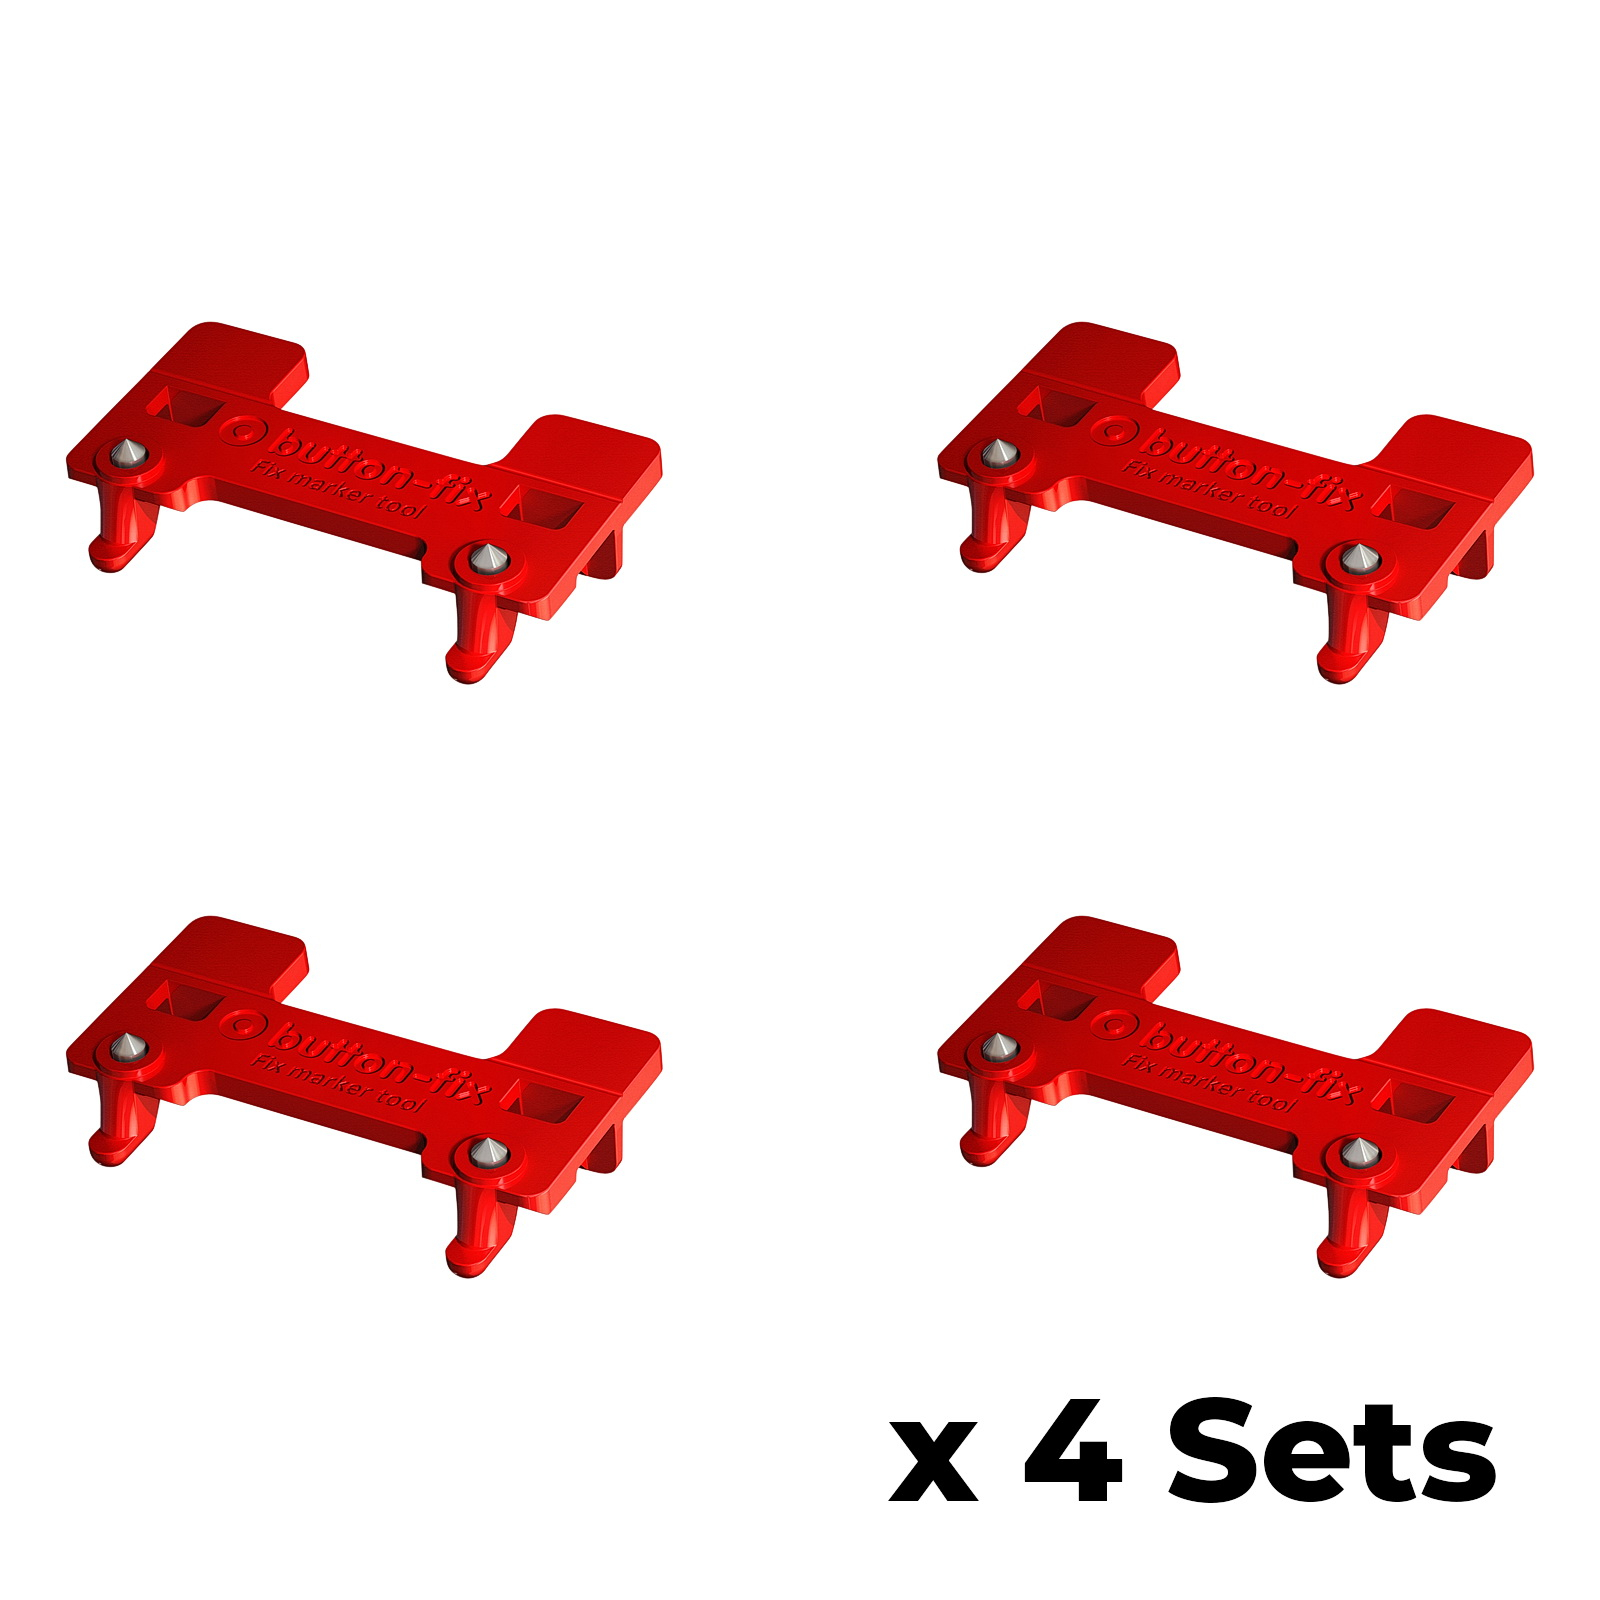 Button Fix Type 2 Bracket Fix Marker Tool Guide Kit Connecting Panels x4